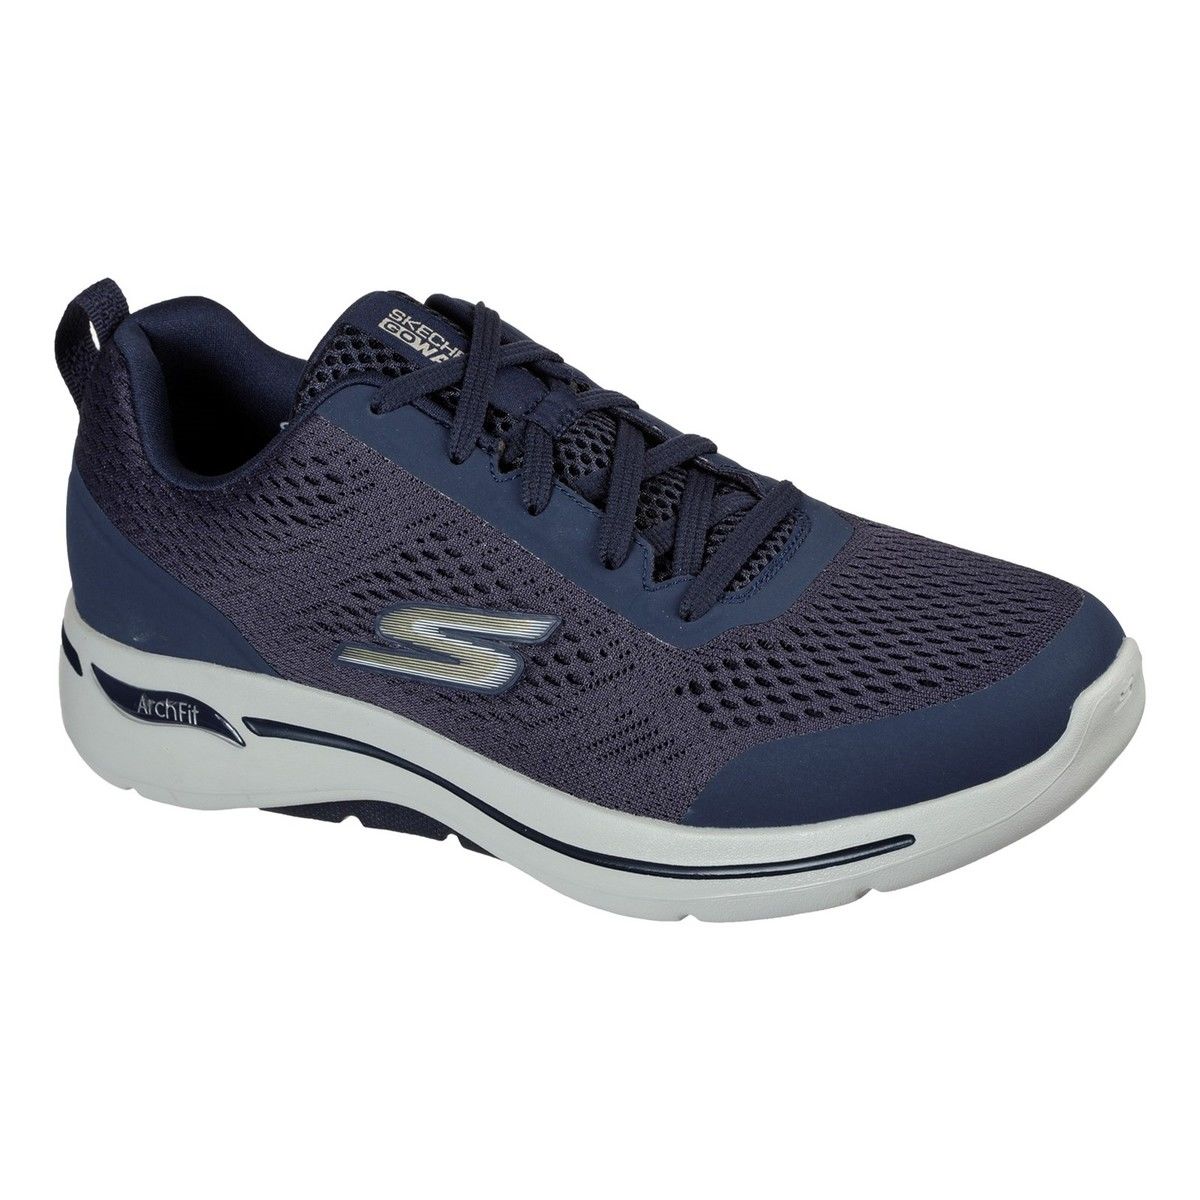 Skechers Go Walk Arch Fit NVGD Navy Gold Mens trainers in a Plain Textile in Size 7